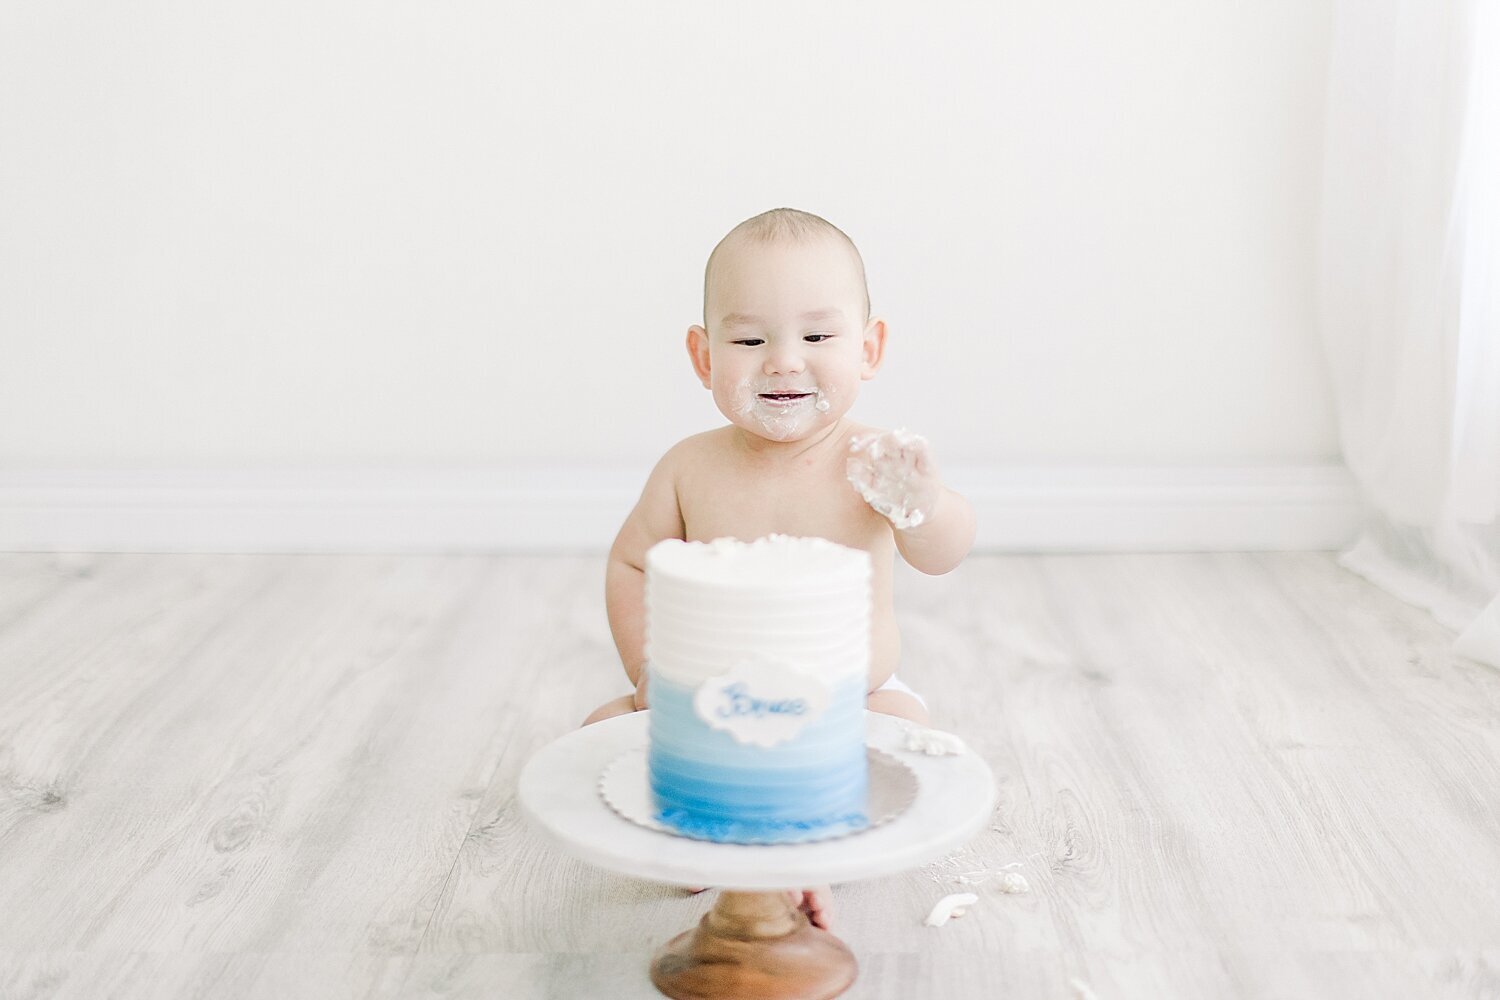 First birthday photoshoot in Newport Beach Studio. Photo by Ambre Williams Photography.